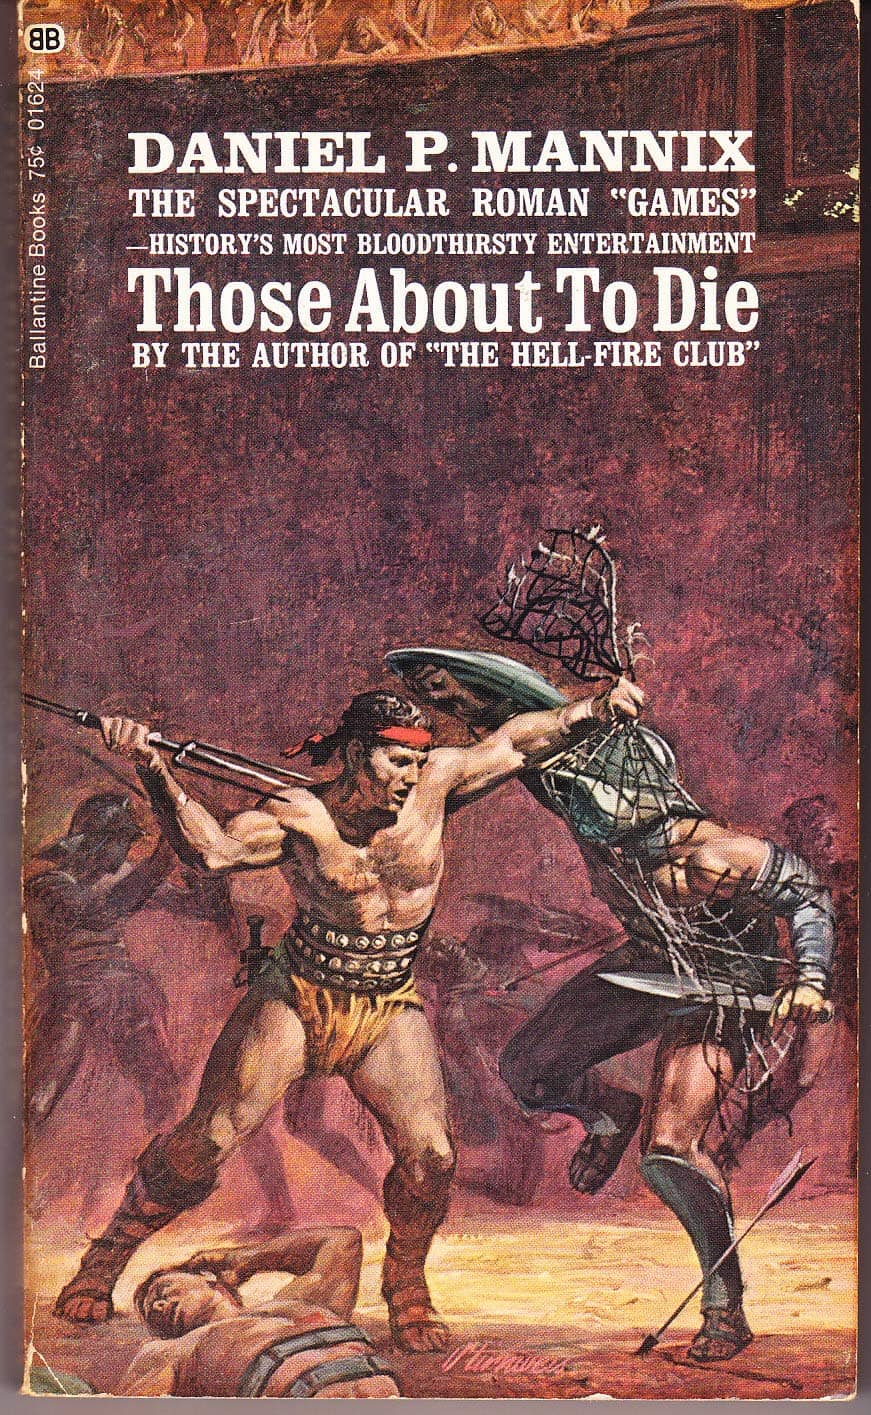 Those About To Die by Daniel P. Mannix